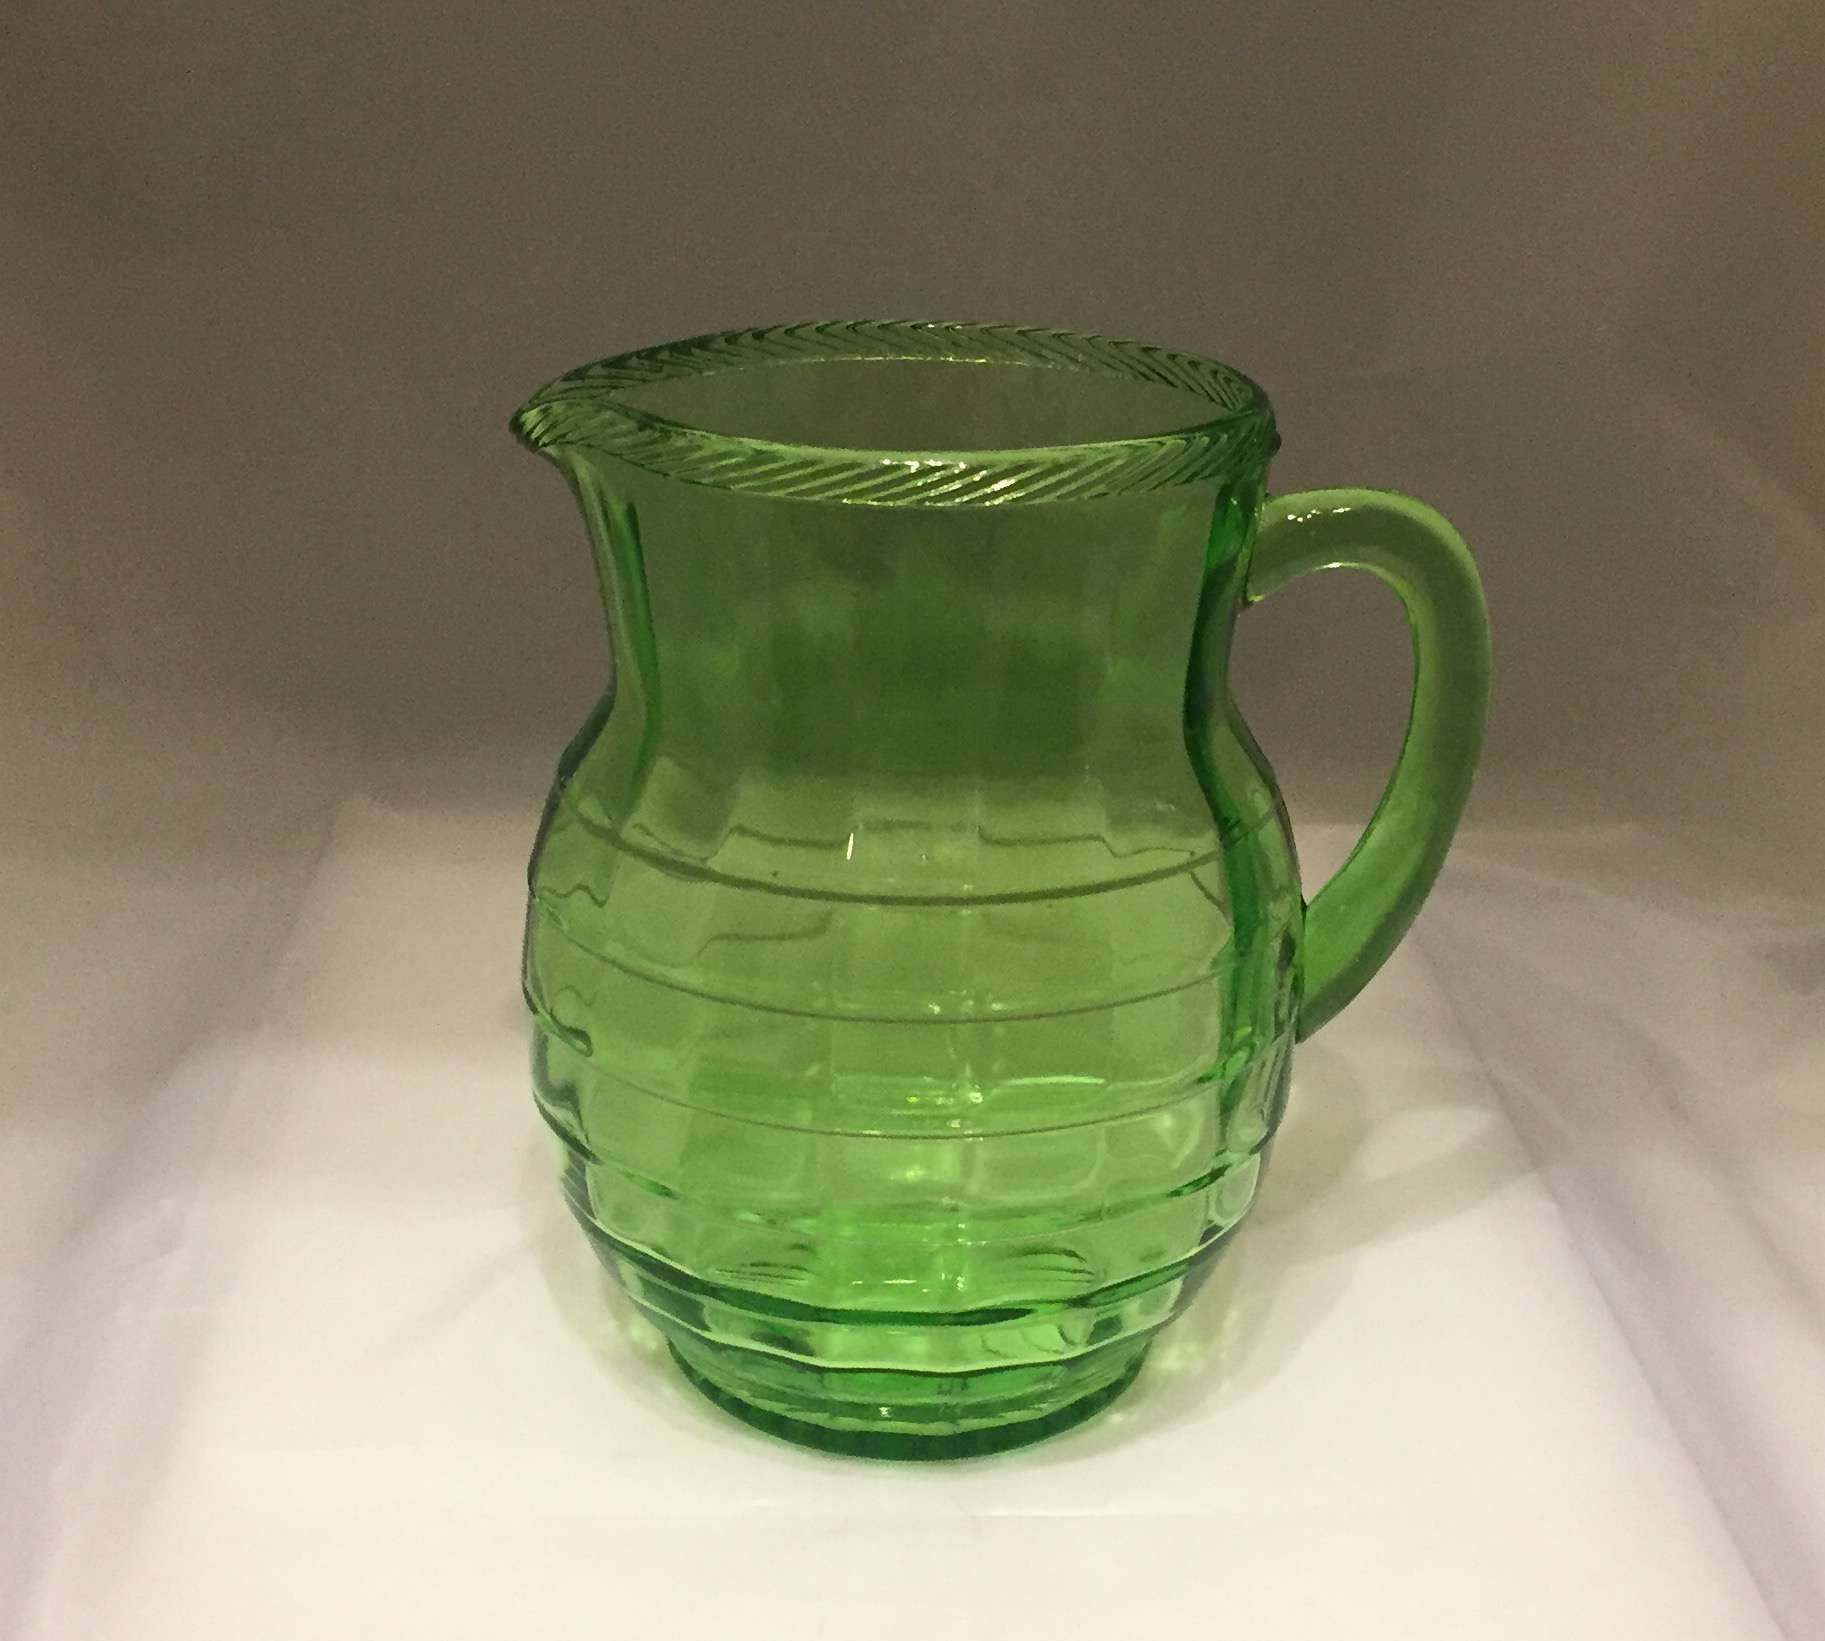 22 Recommended Footed Clear Glass Vase 2024 free download footed clear glass vase of depression glass price guide and pattern identification for blockpitcher 5786c8e35f9b5831b54ecdb1